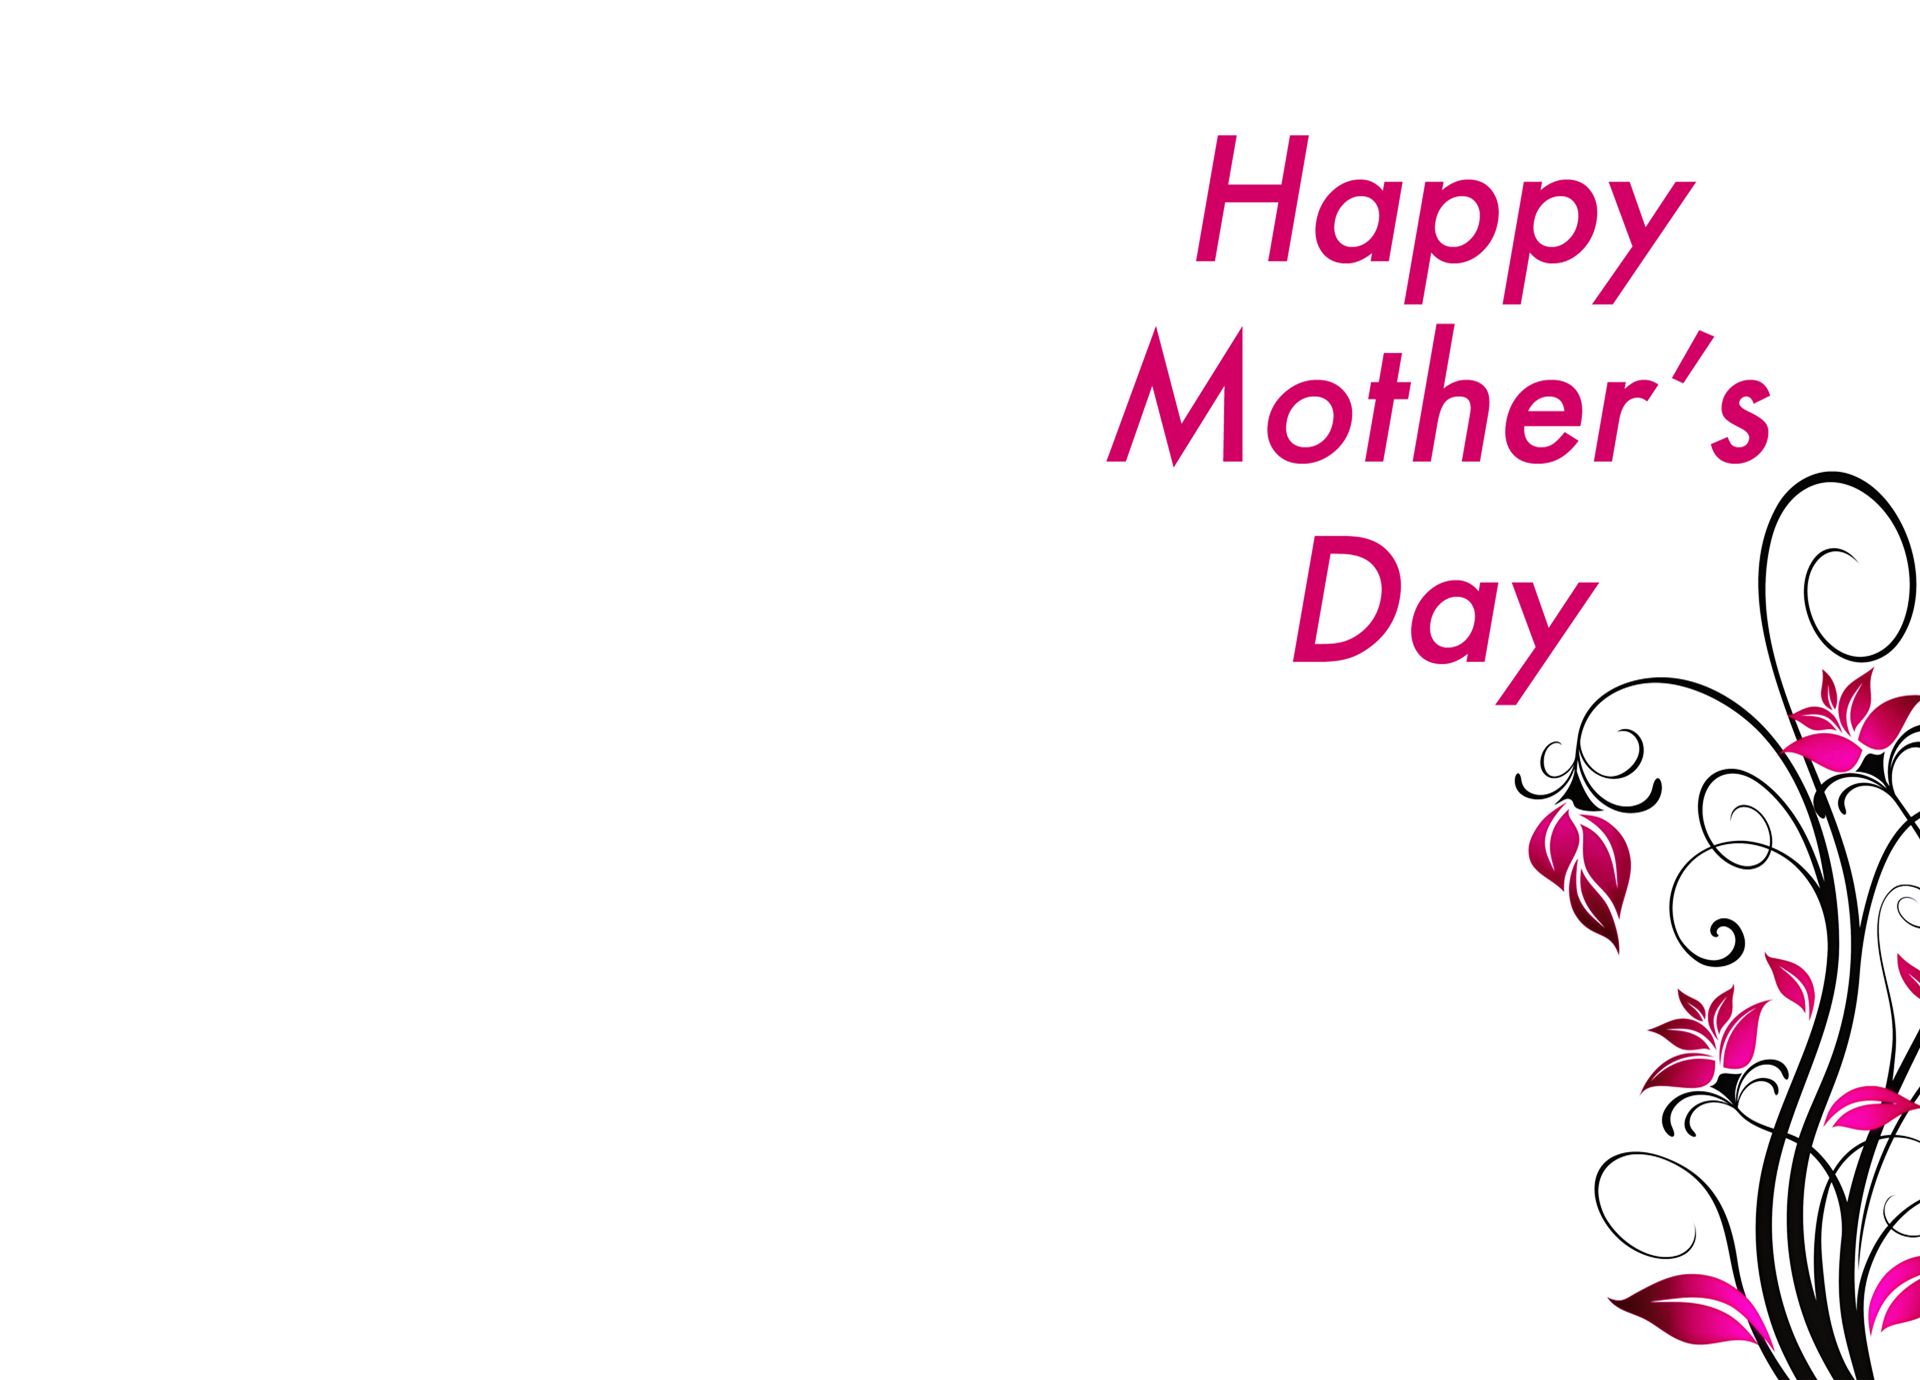 Mothers Day Cards Free Download Wallpapers, Backgrounds, Images